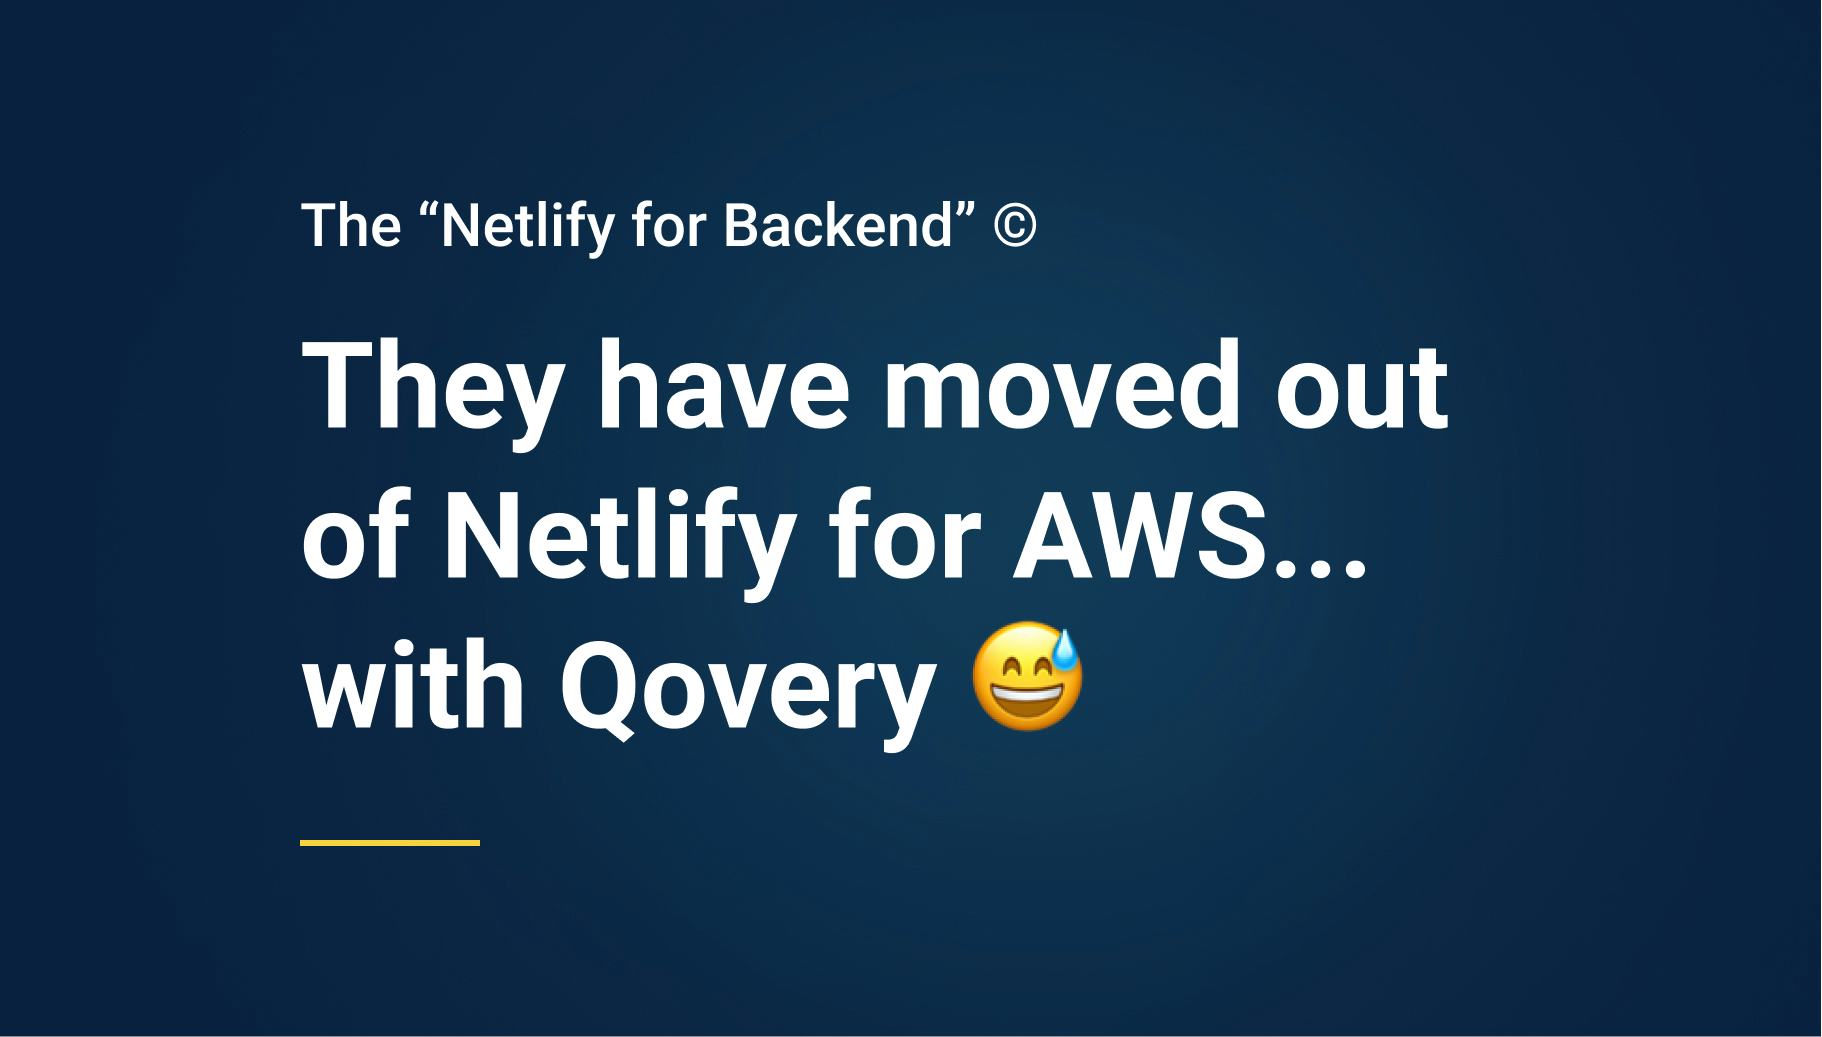 We built the "Netlify for backend" that runs on your AWS account! - Qovery